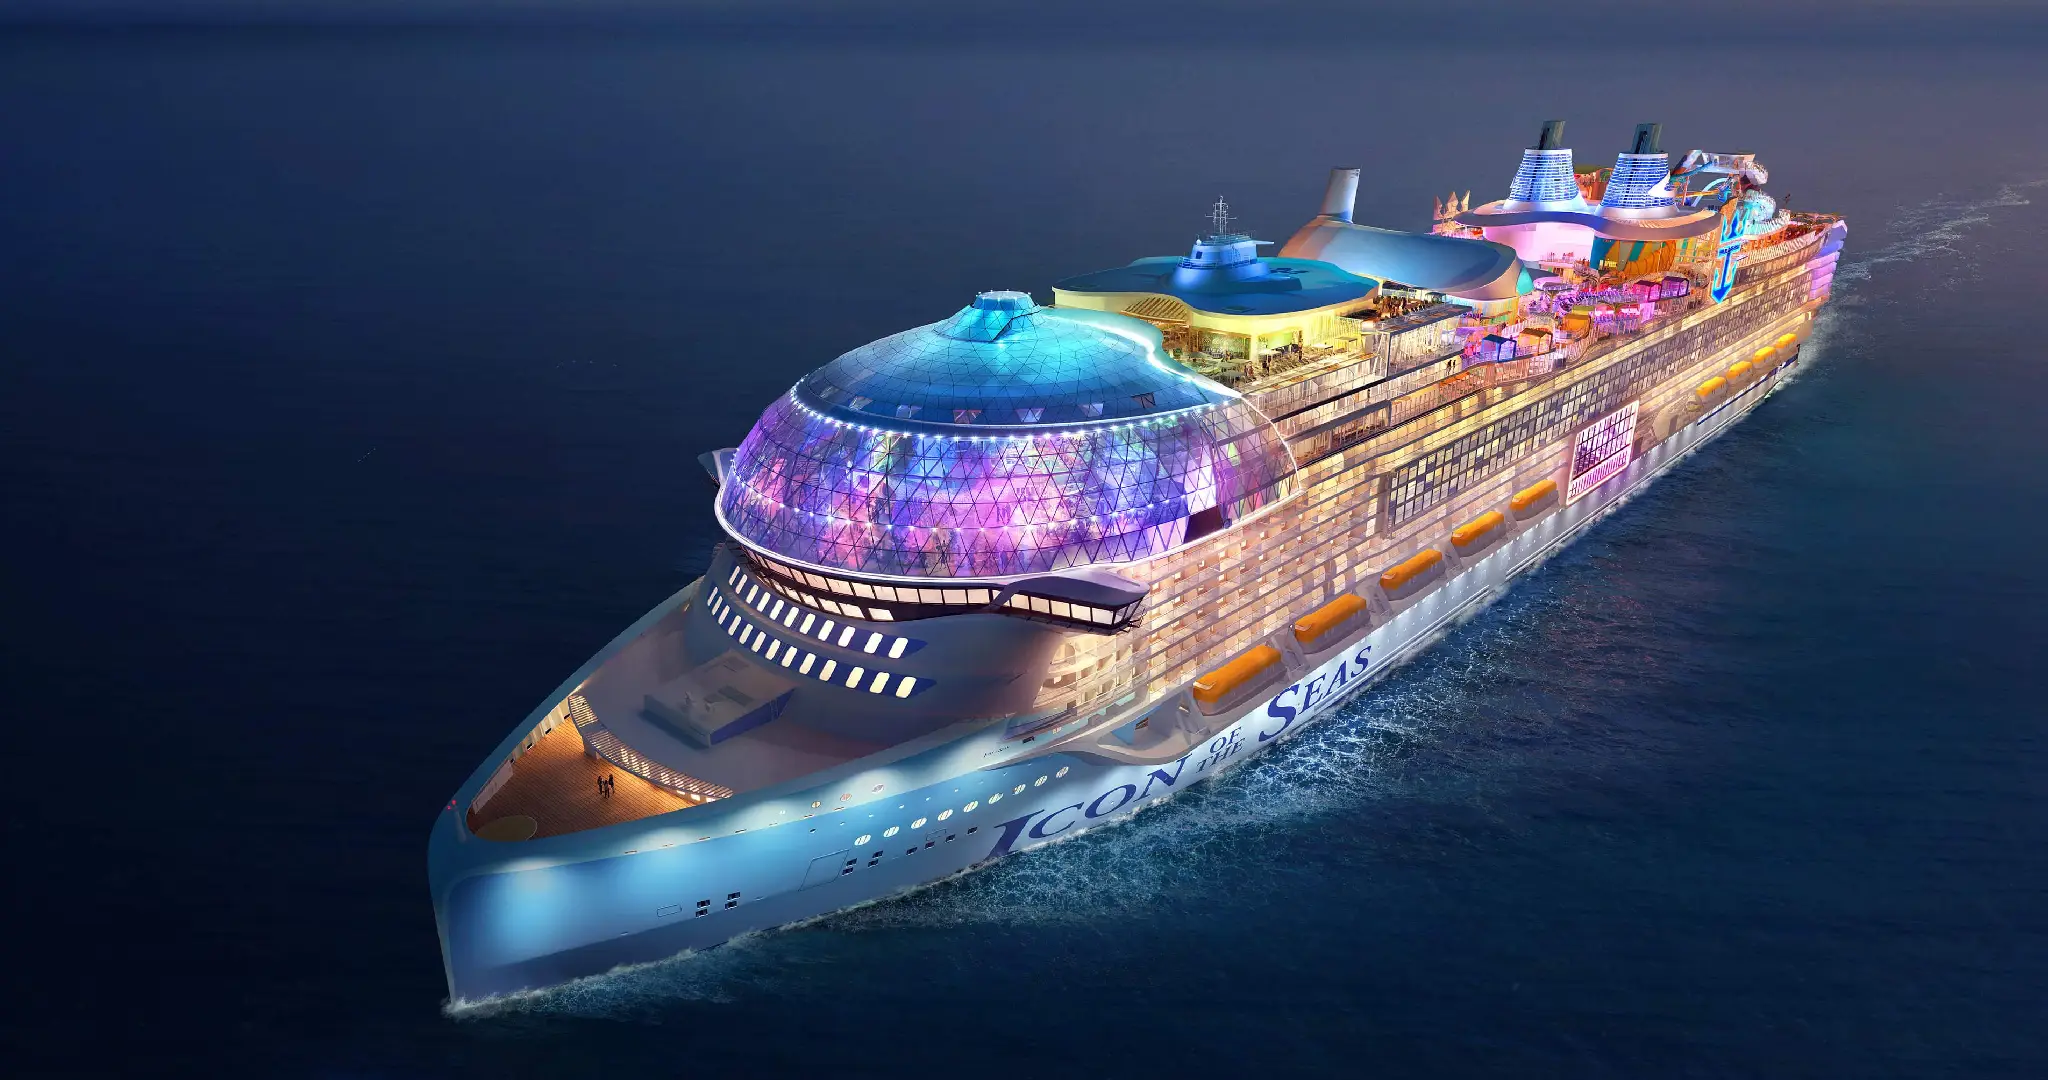 World's Largest Cruise Ship Poised for Inaugural Passenger Voyage Departure from Miami